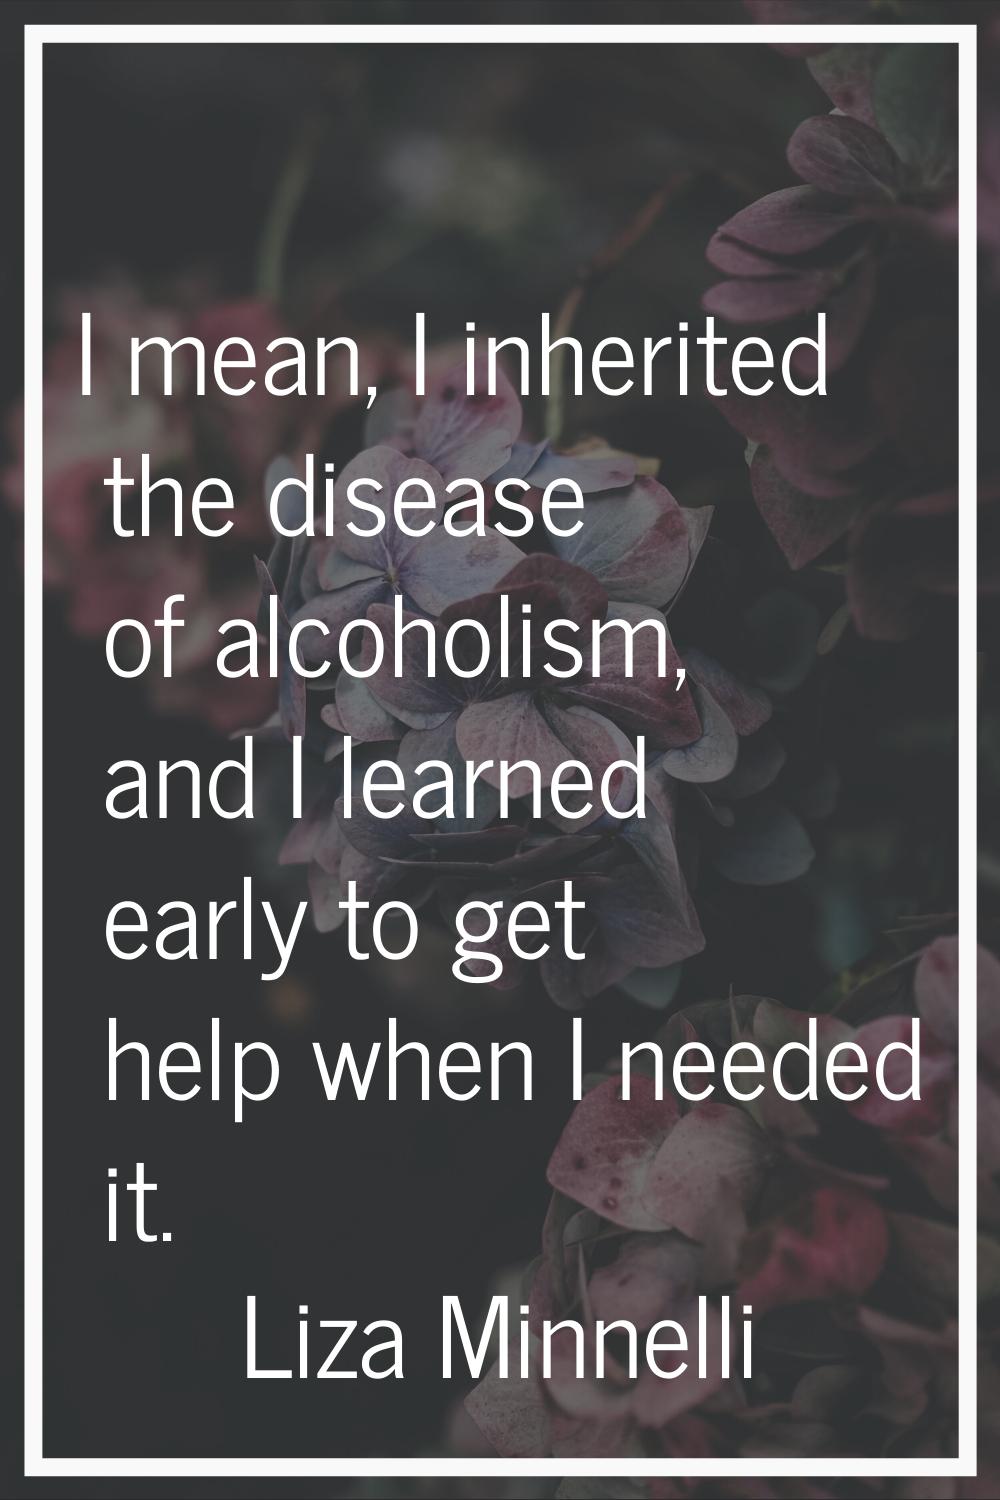 I mean, I inherited the disease of alcoholism, and I learned early to get help when I needed it.